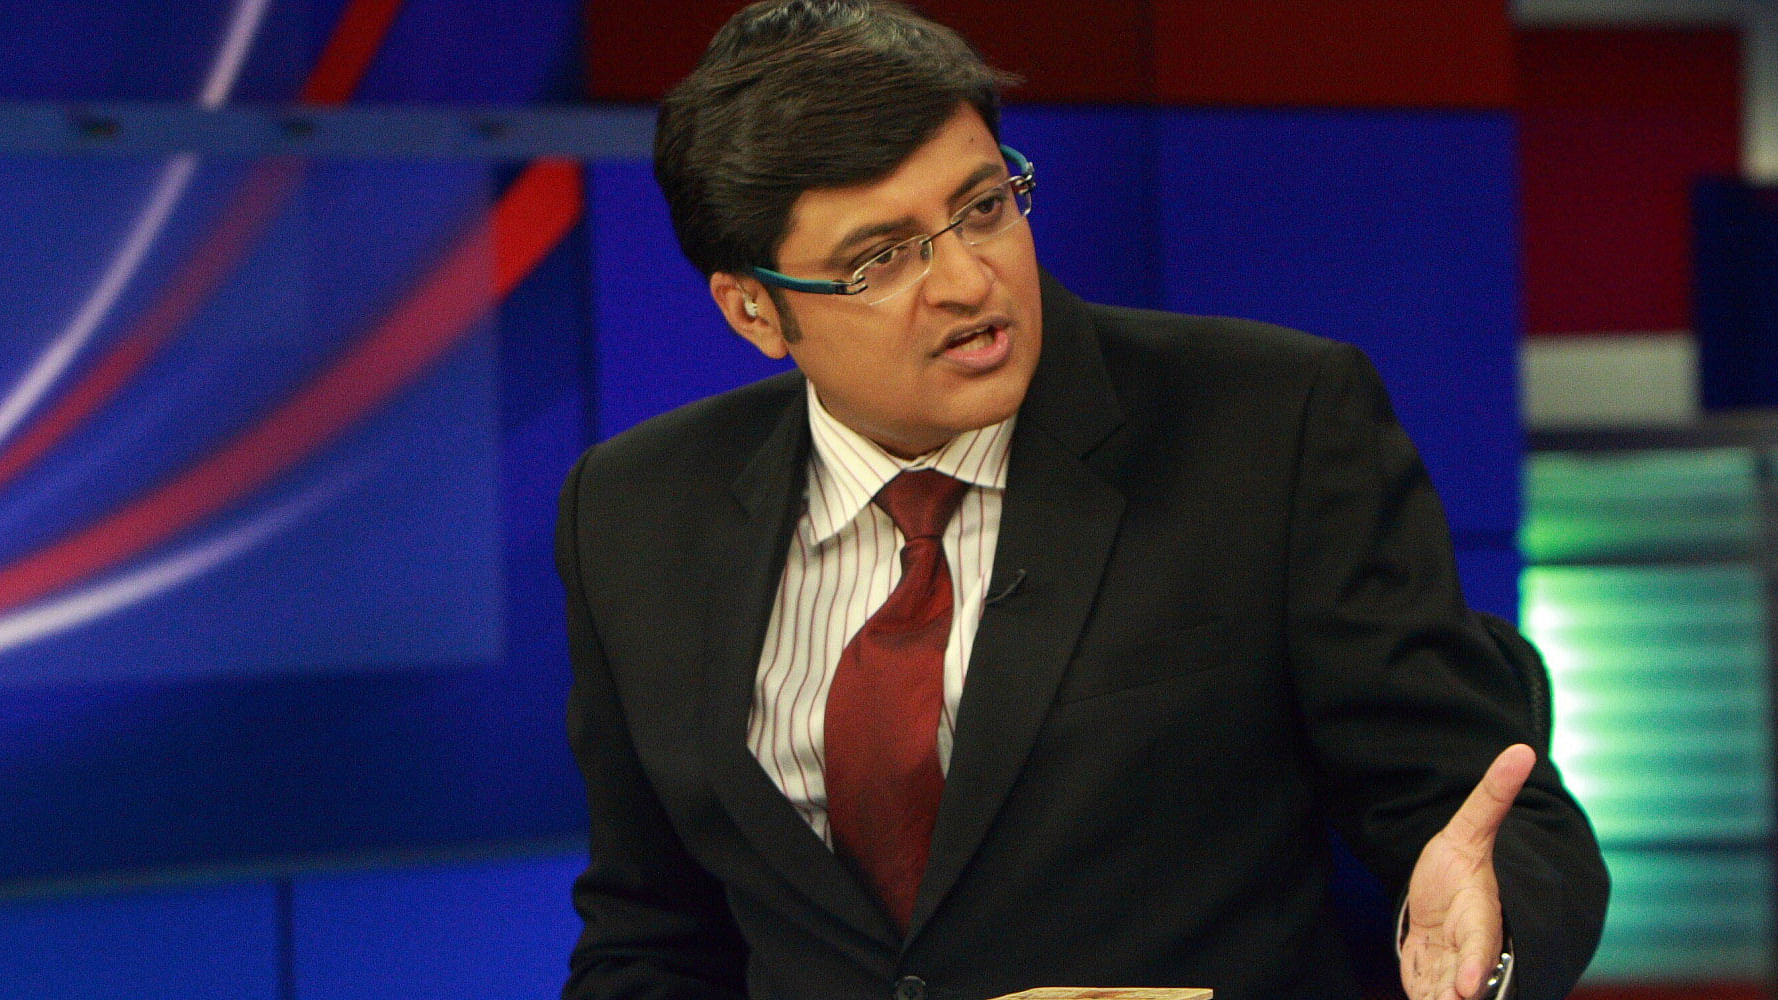 The test broadcasts of Goswami’s Republic reportedly carry the catchphrase ‘We are your voice’. (Photo Courtesy: <a href="http://www.youthkiawaaz.com/2016/03/arnab-goswami-is-good-for-indian-journalism/">youthkiawaaz.com</a>)